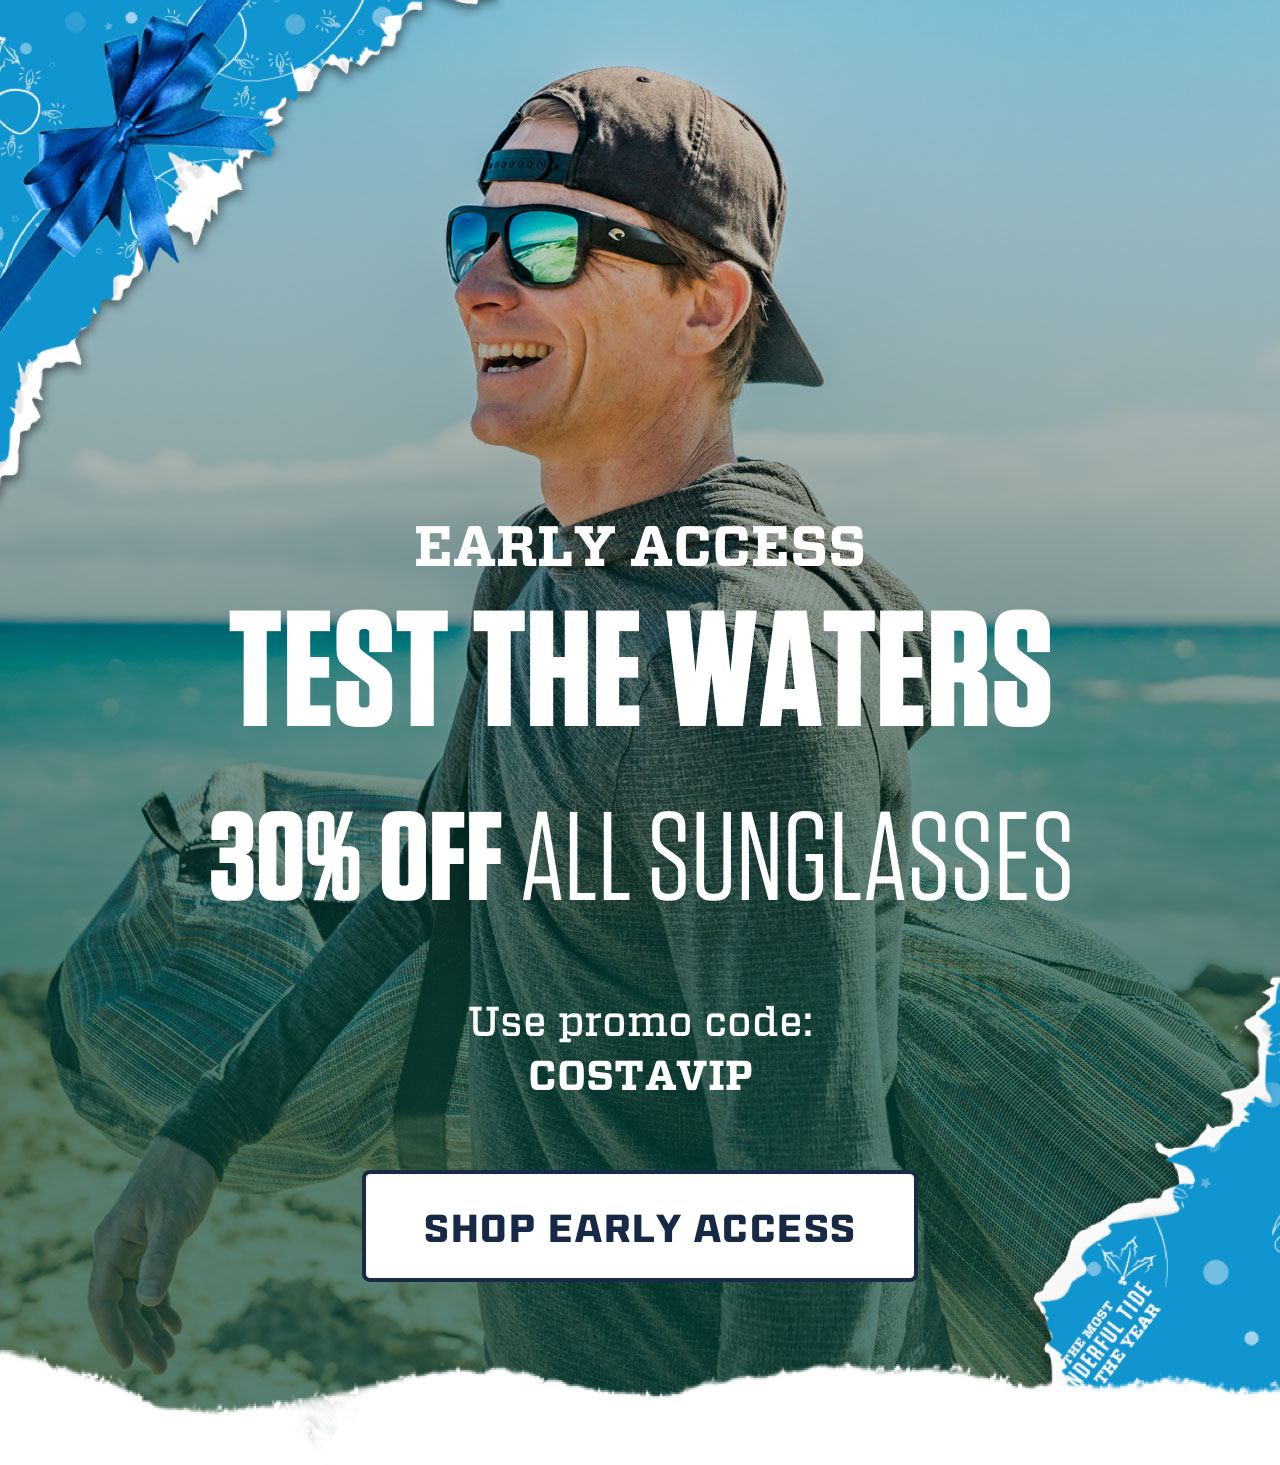 


EARLY ACCESS
TEST THE WATERS

30% OFF ALL SUNGLASSES

Use promo code:
COSTAVIP

[ SHOP EARLY ACCESS ]

									